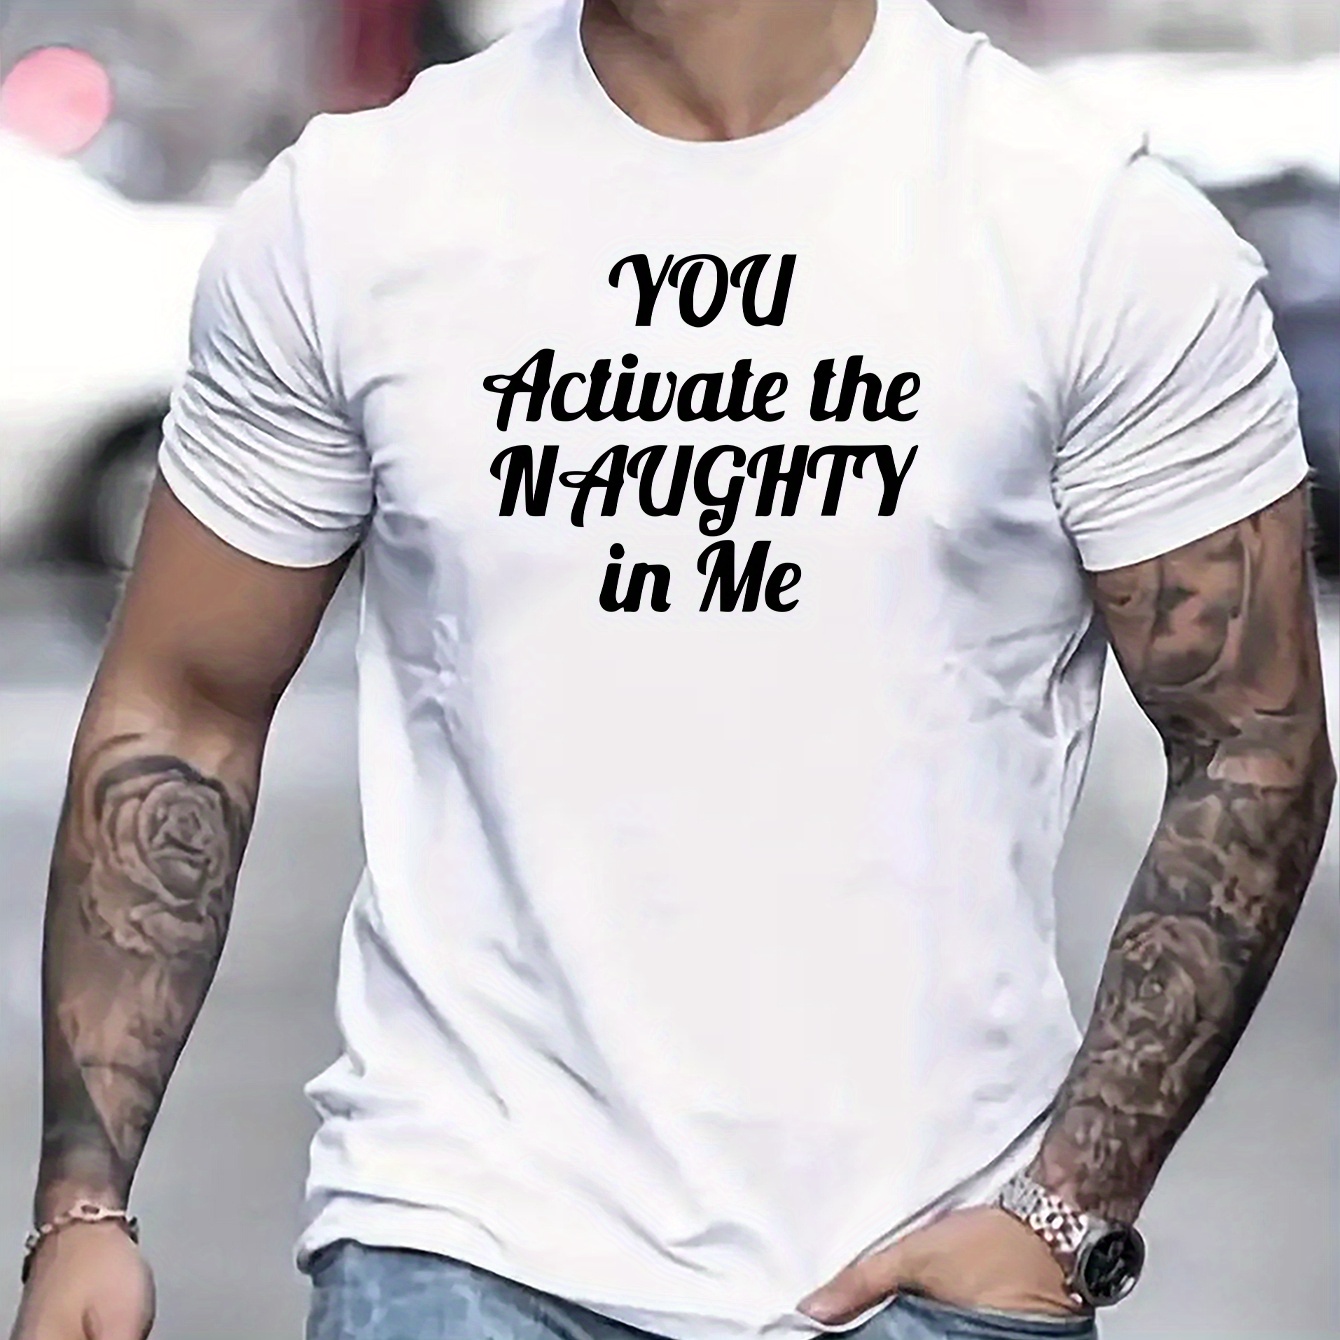 

You Activate The Naughty In Me Print, Men's Novel Graphic Design T-shirt, Casual Comfy Tees For Summer, Men's Clothing Tops For Daily Activities